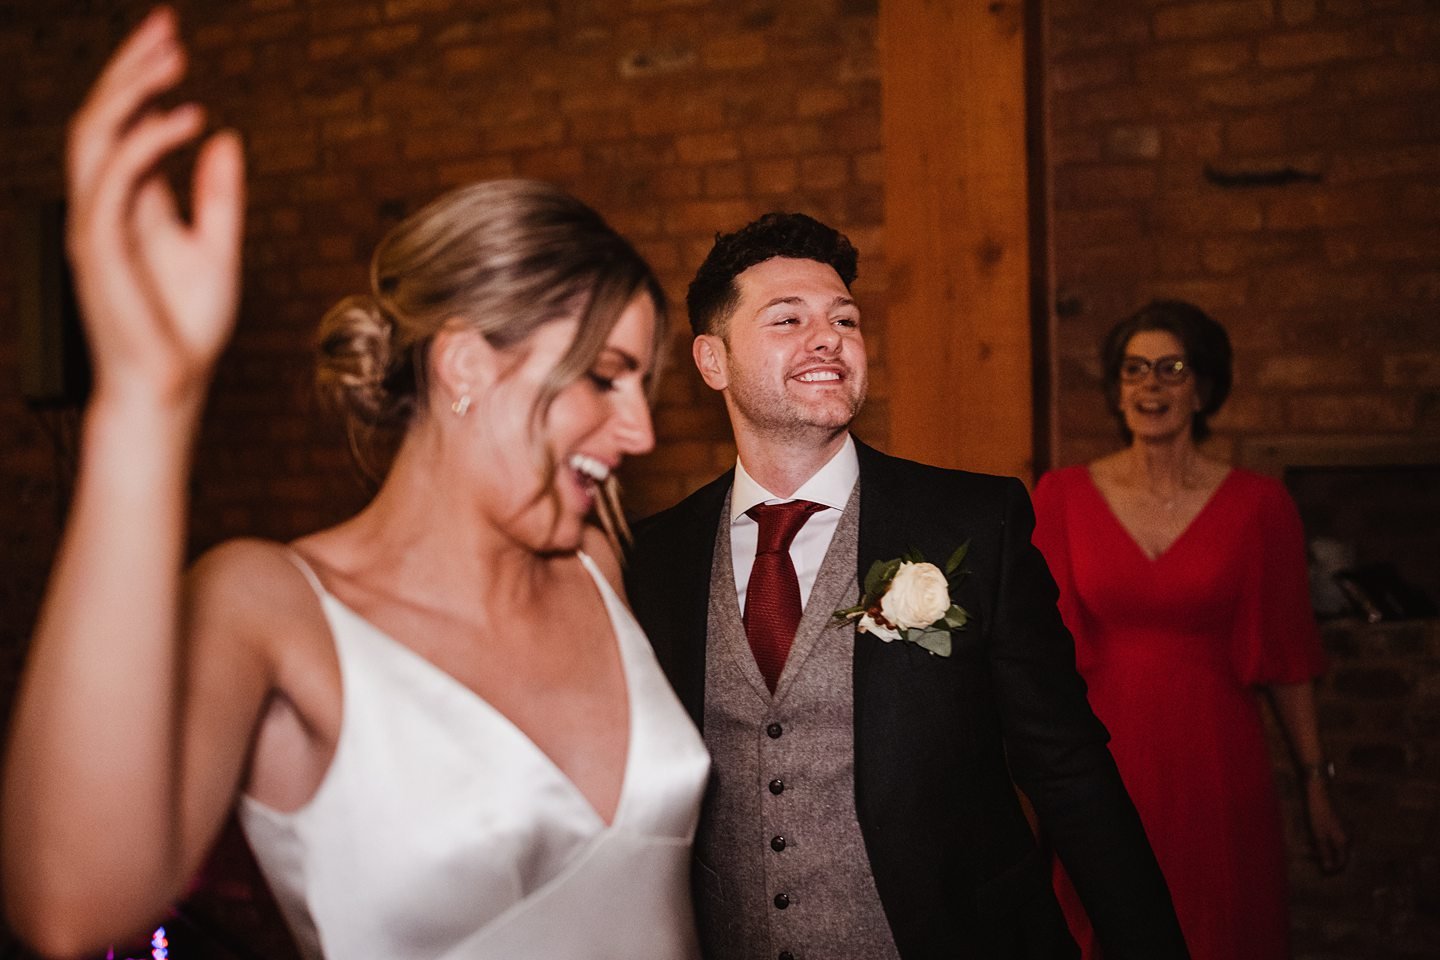 A Cheshire Winter Wedding At The Holford Estate In Knutsford146.jpg